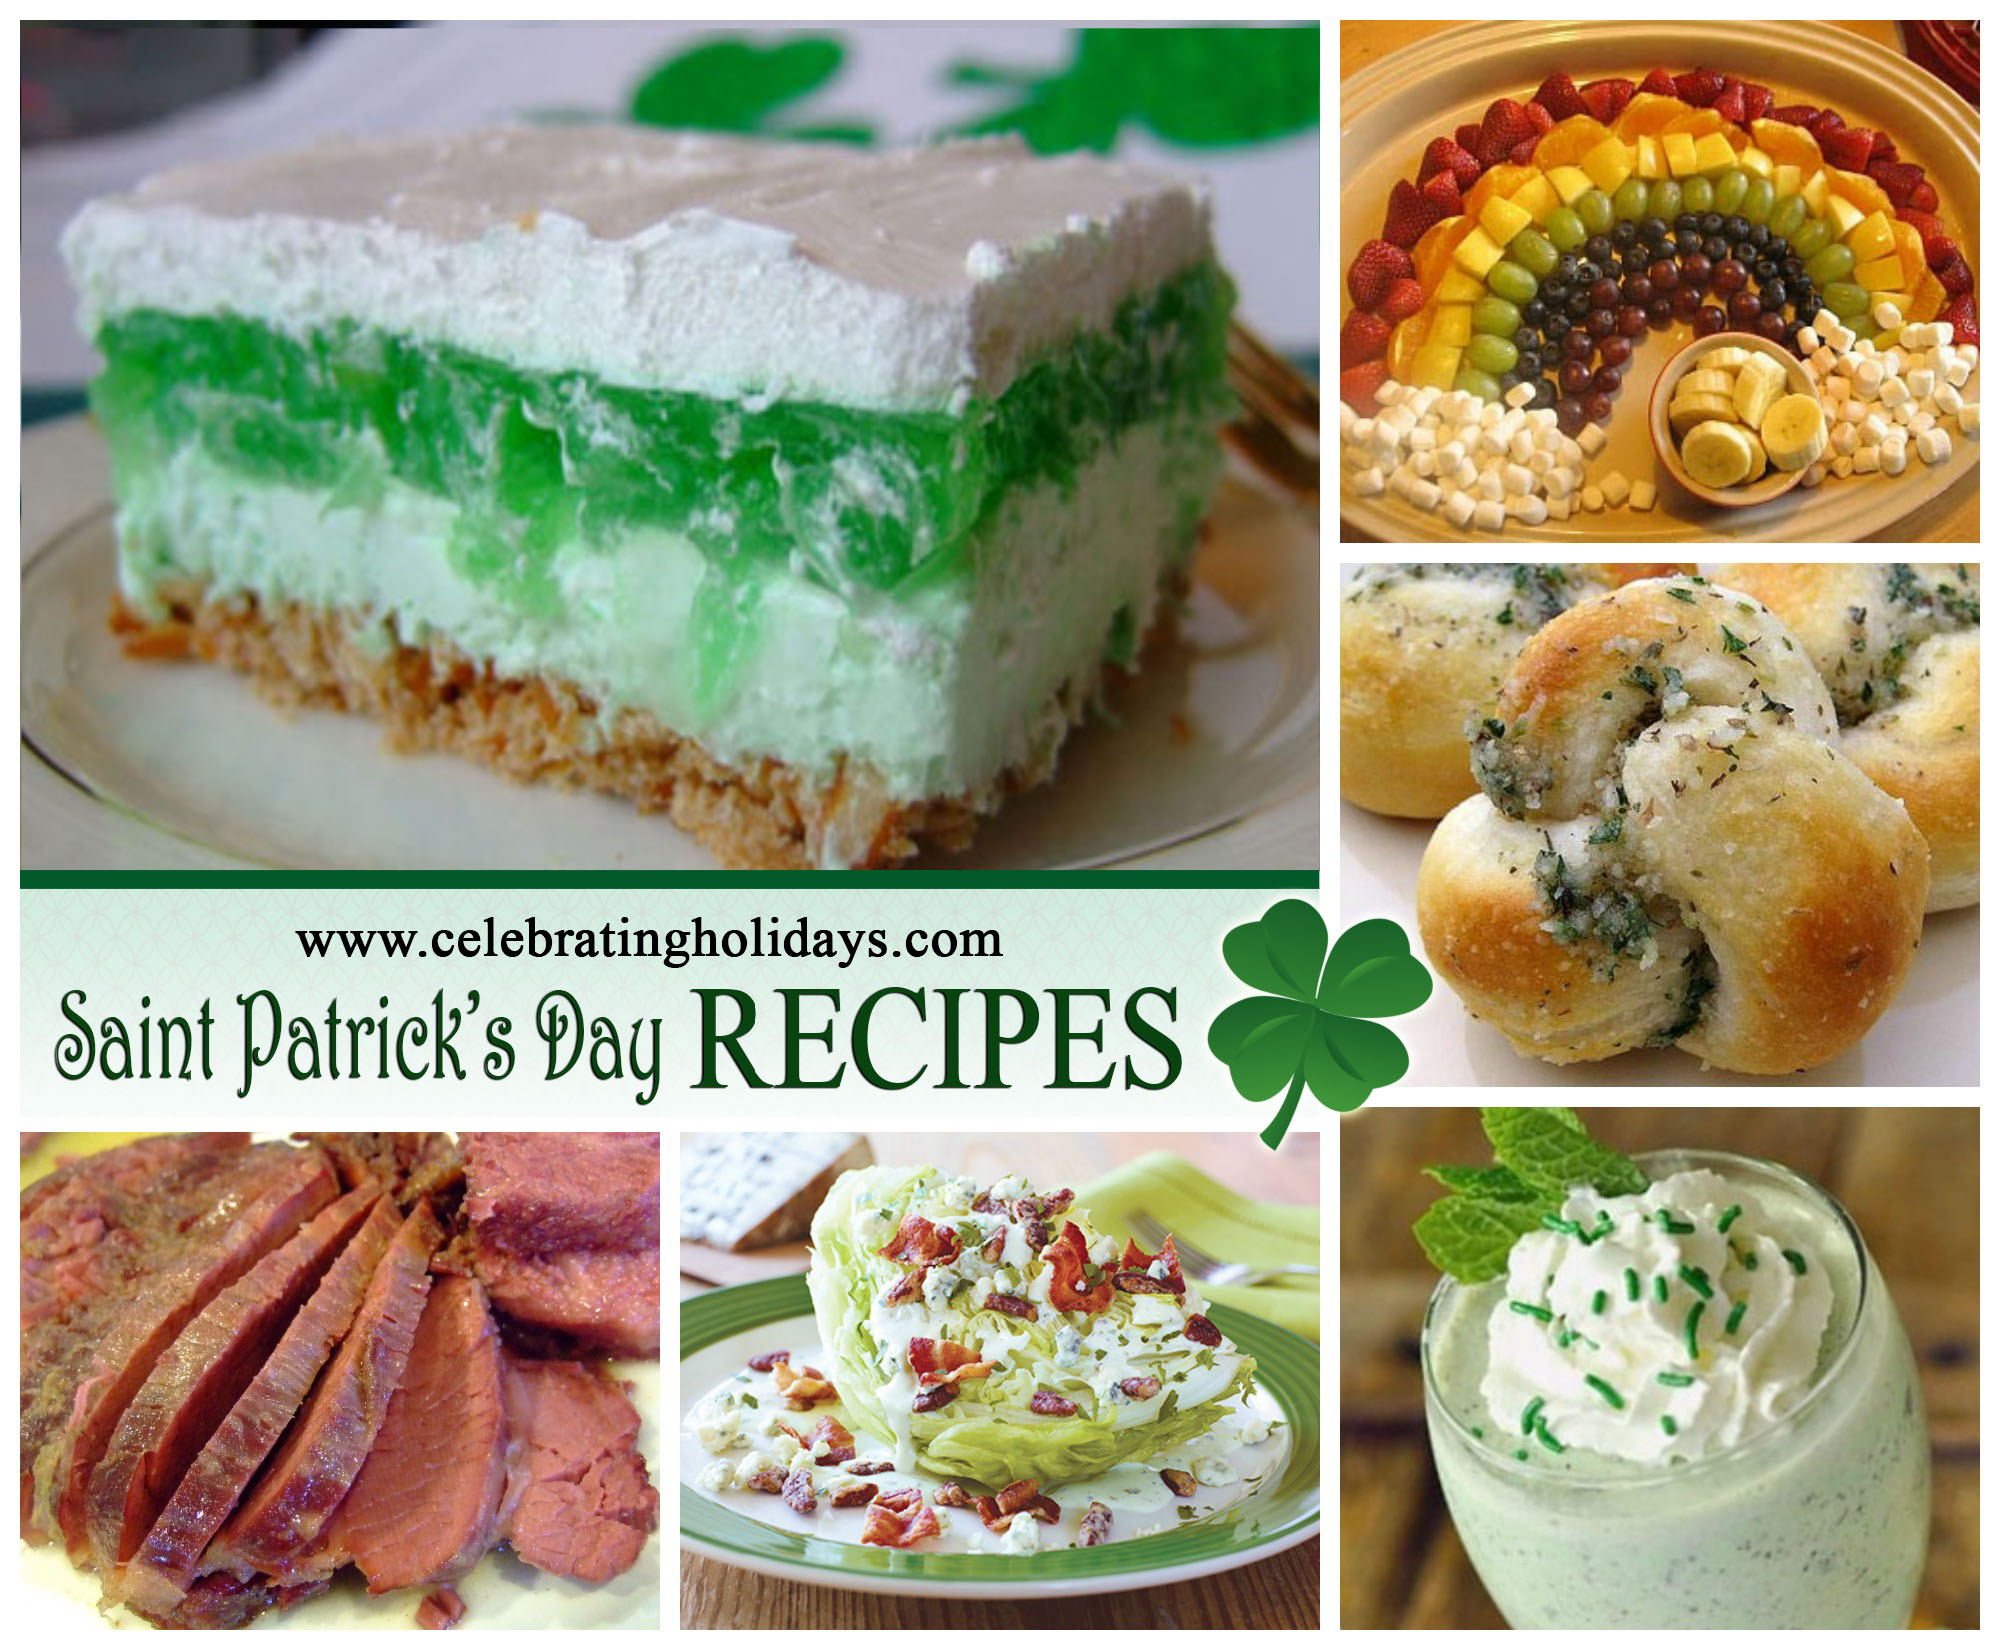 Recipes for St. Patrick's Day